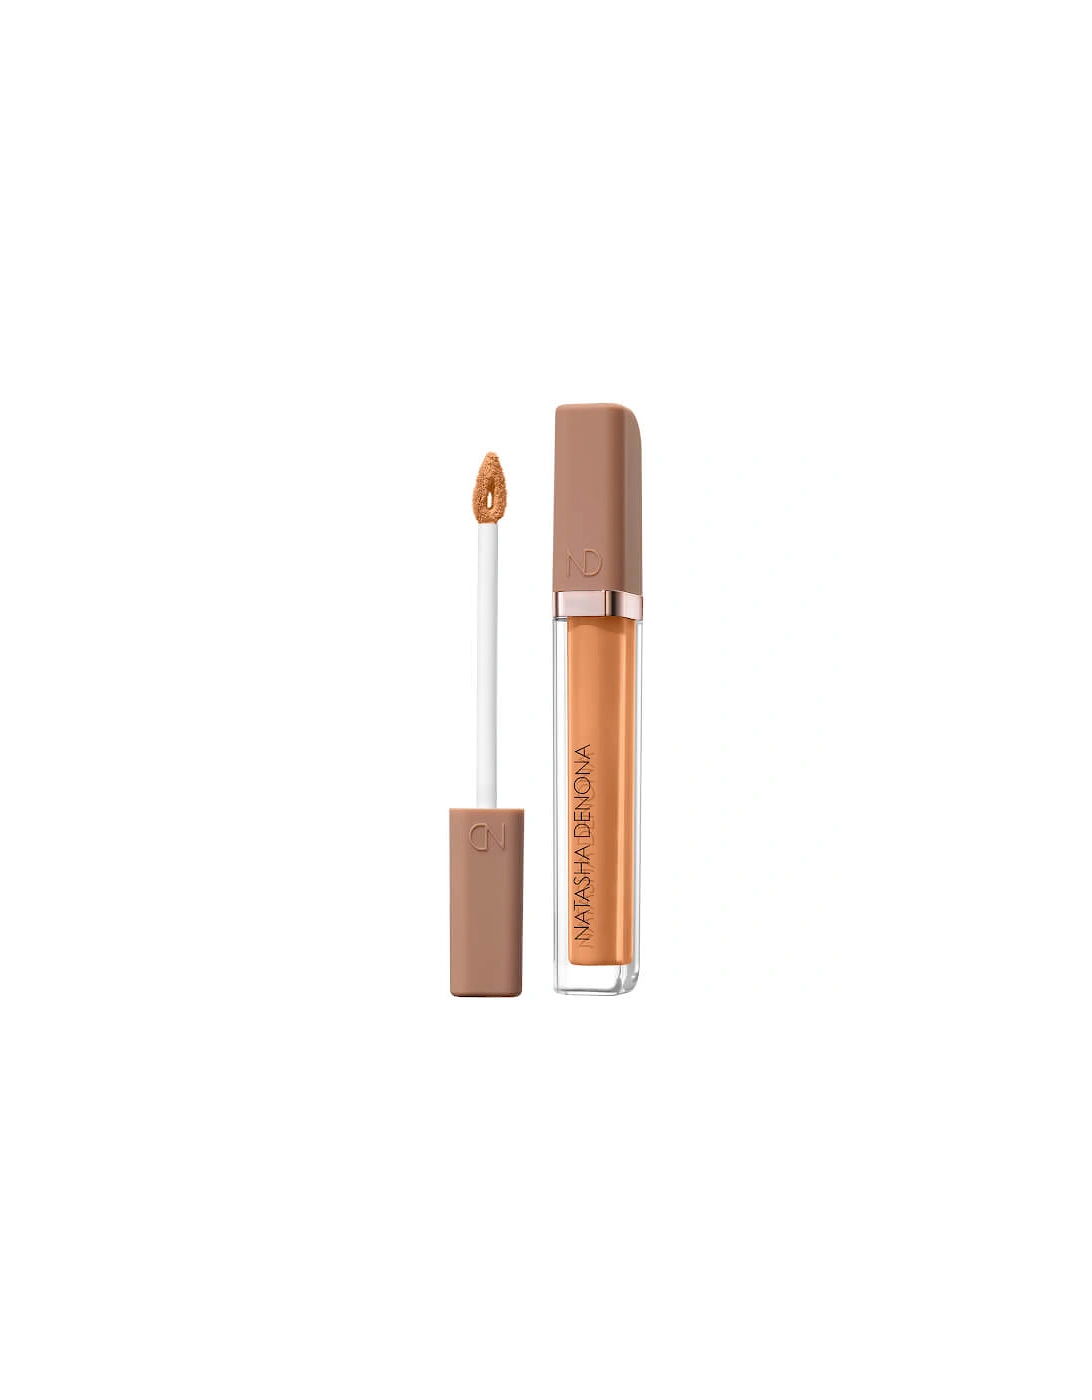 Hy-Glam Concealer - P6, 2 of 1